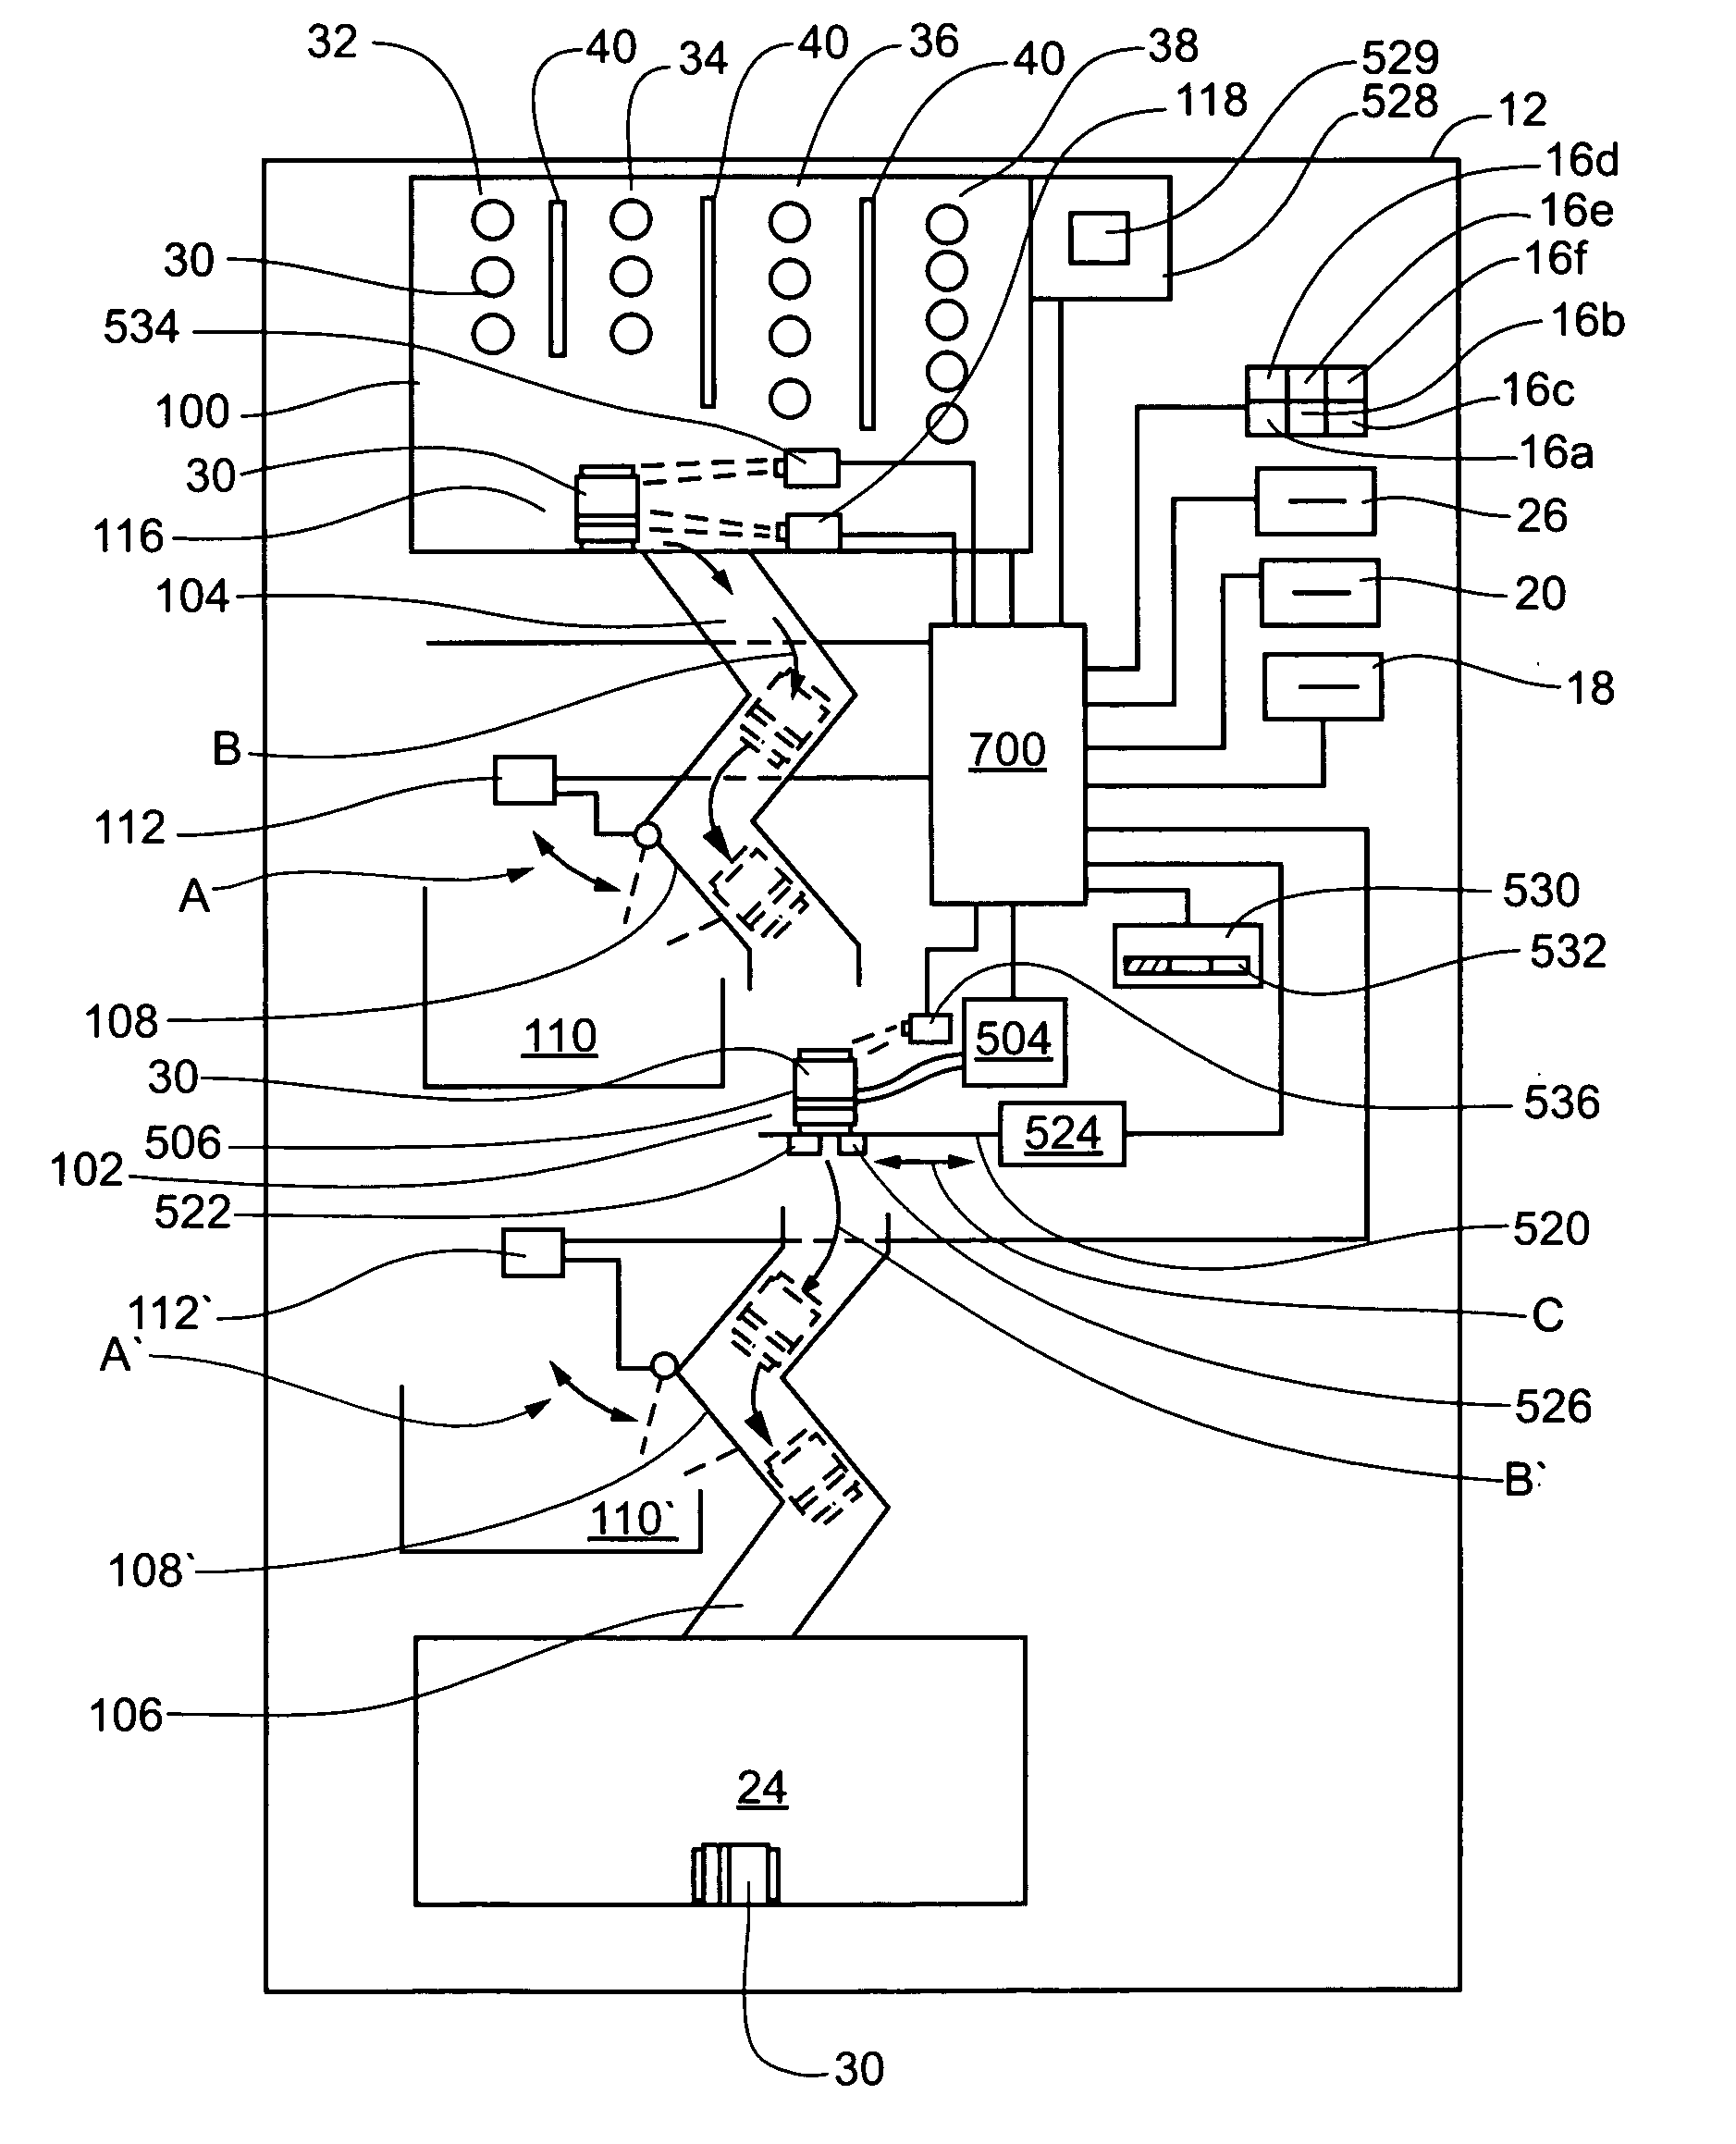 Method and apparatus for product agitation in a vending machine